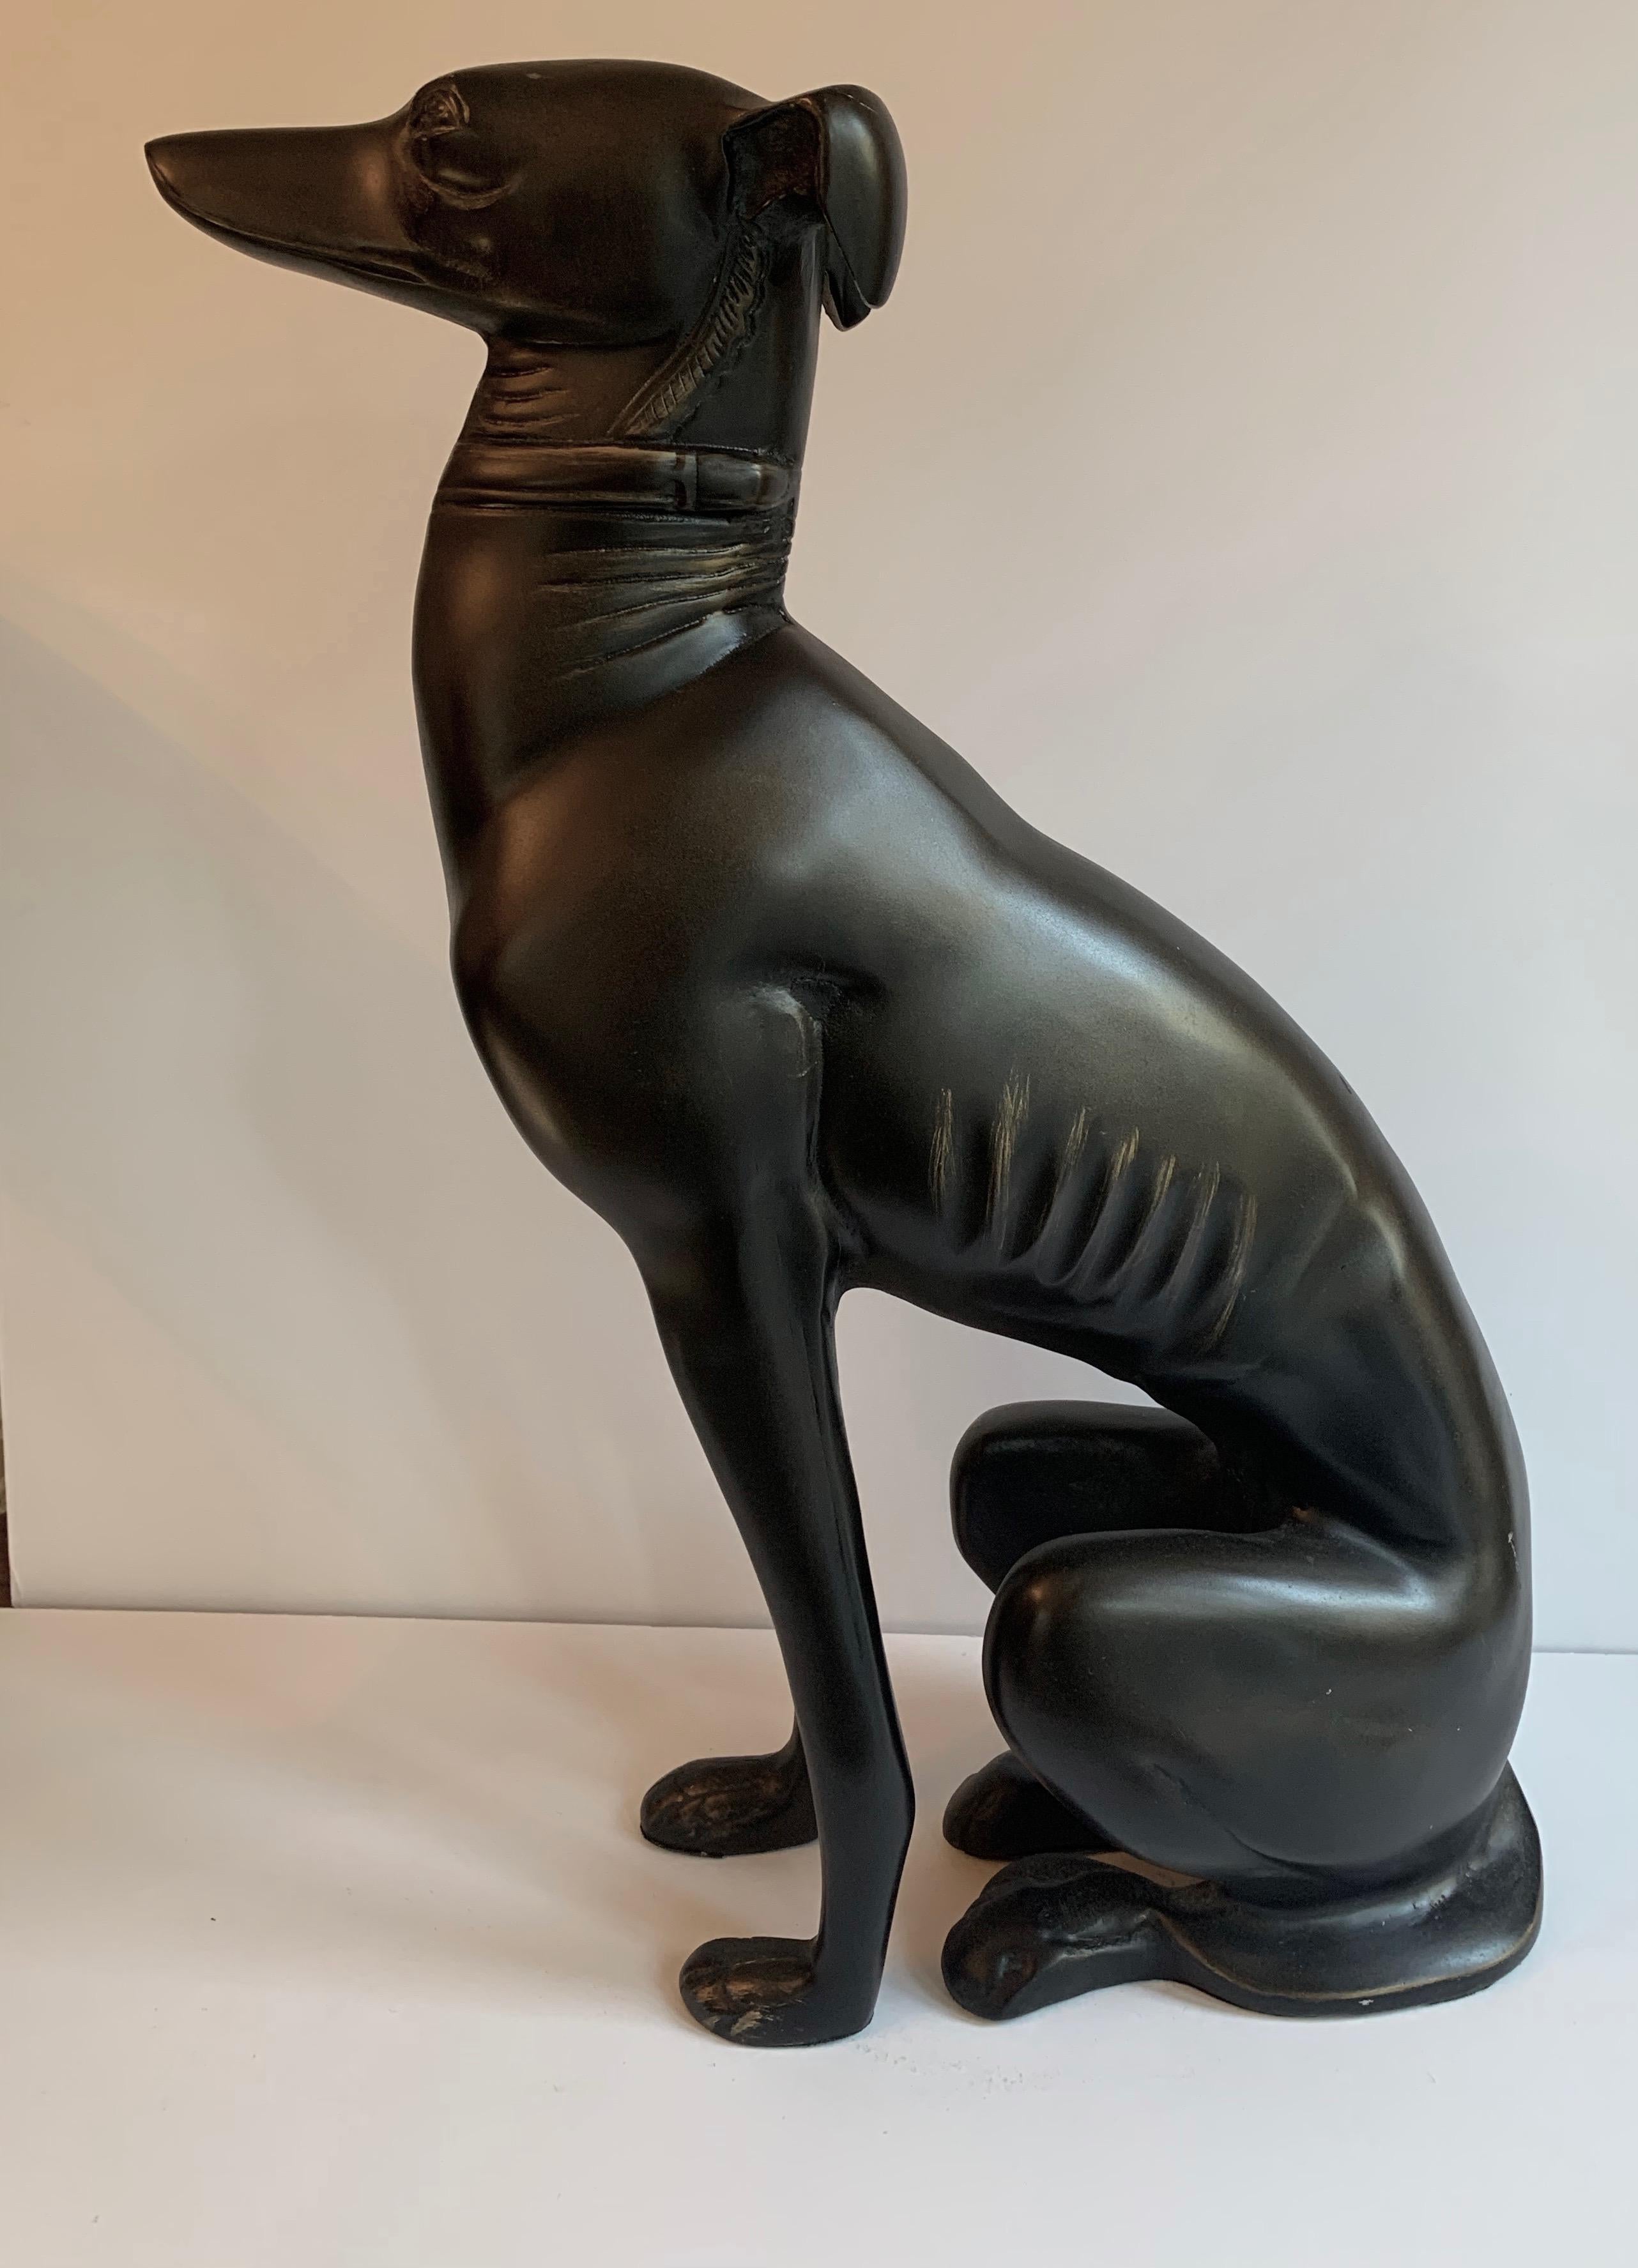 Handsome and wonderfully decorative, made of bronze and in very good condition this whippet seated in any room, or corner gives a great deal of character.